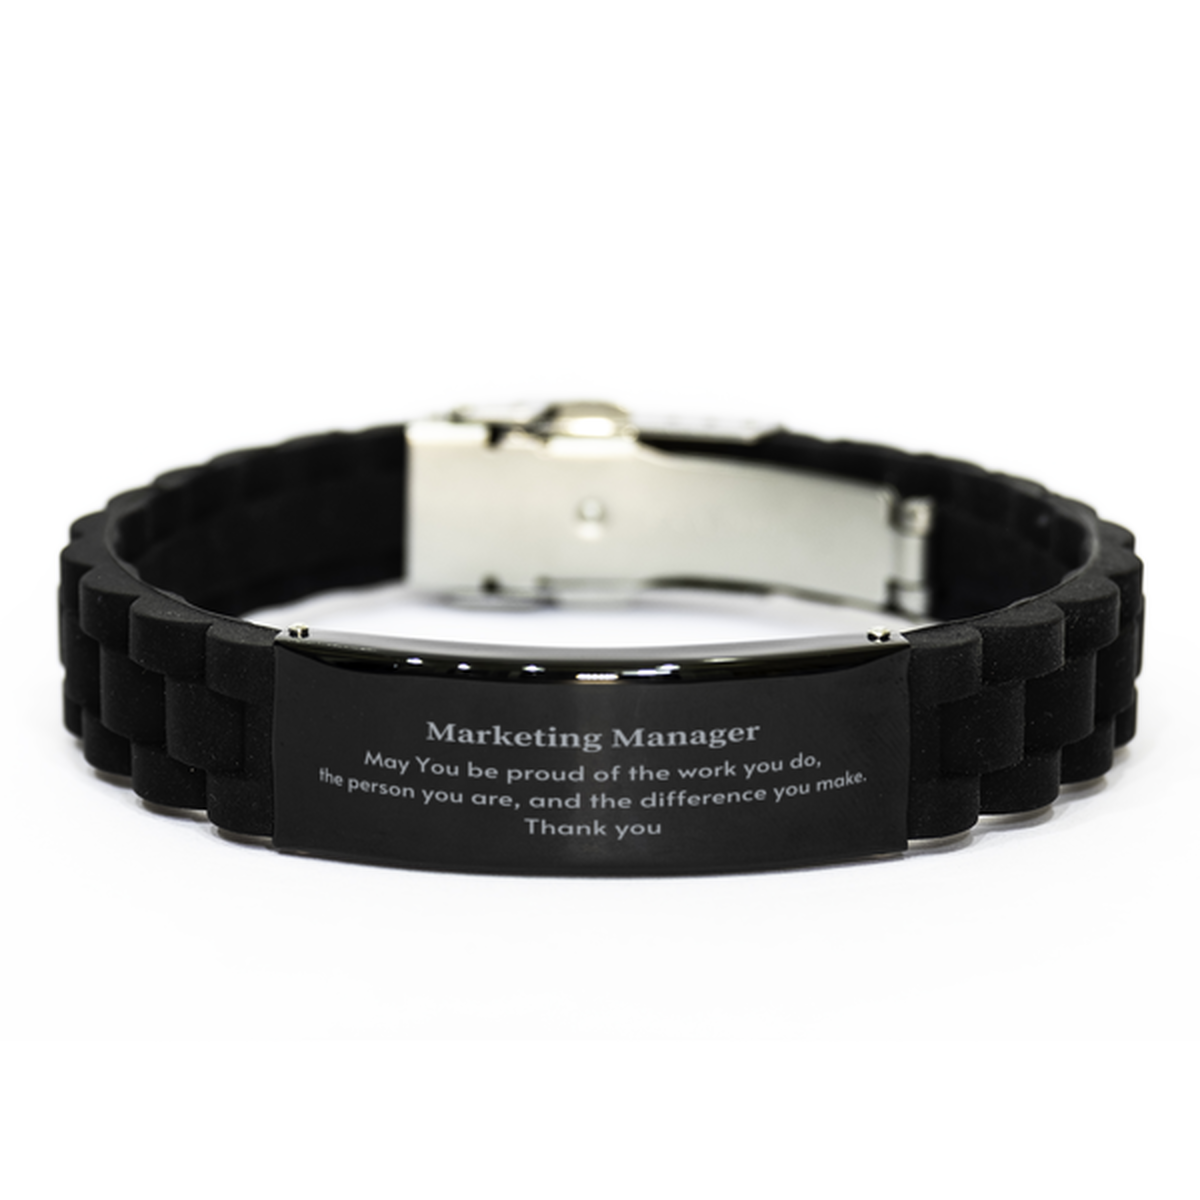 Heartwarming Black Glidelock Clasp Bracelet Retirement Coworkers Gifts for Marketing Manager, Marketing Manager May You be proud of the work you do, the person you are Gifts for Boss Men Women Friends